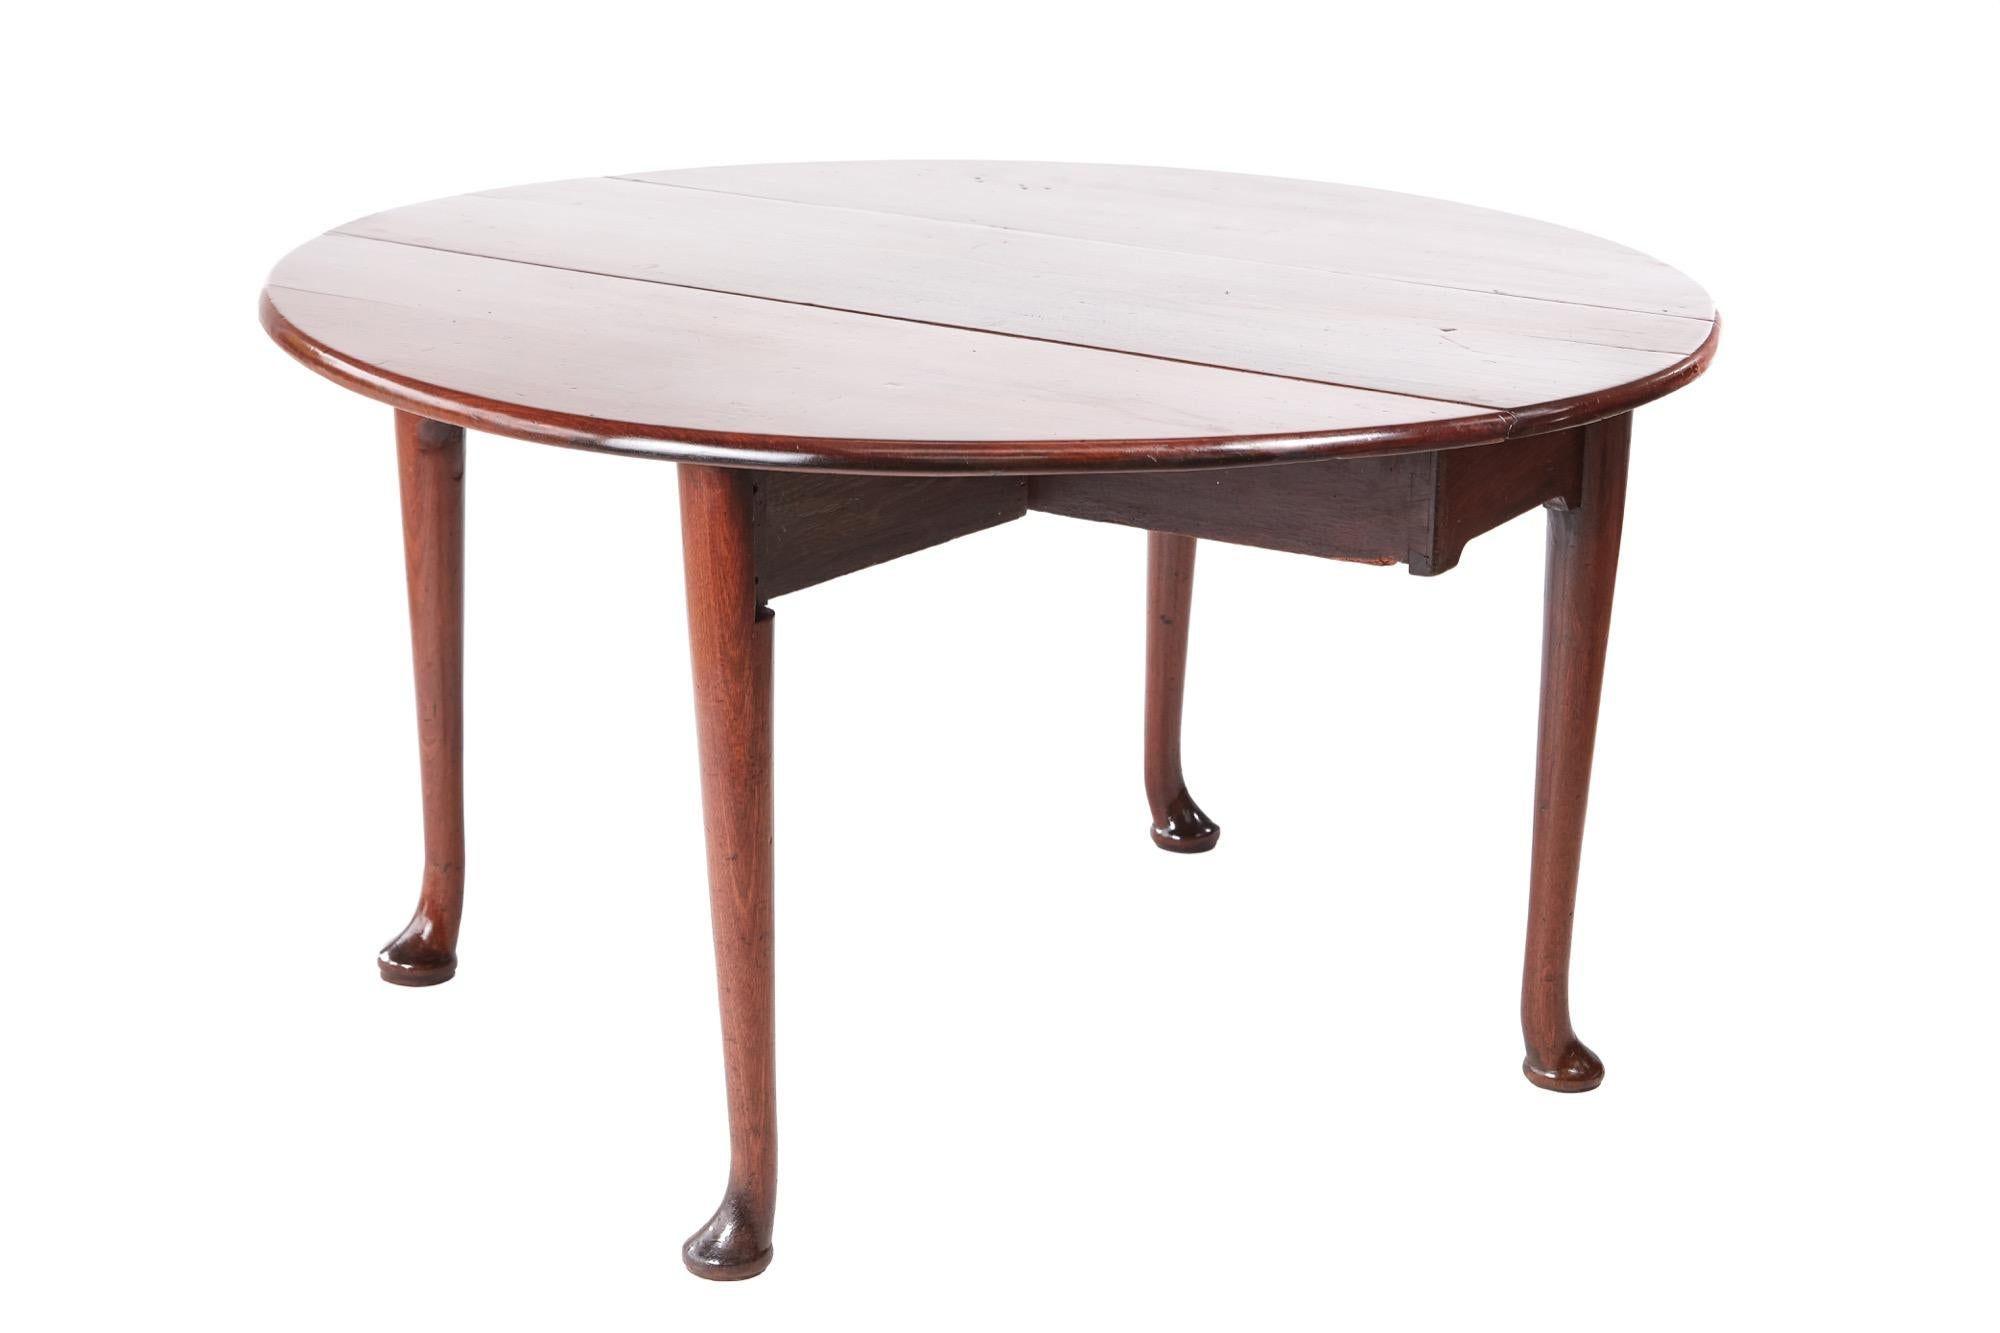 Quality George III mahogany dining table having a quality solid mahogany top with two drop leaves, supported by four turned legs with pad feet
Lovely color and condition
Measures: Closed 51